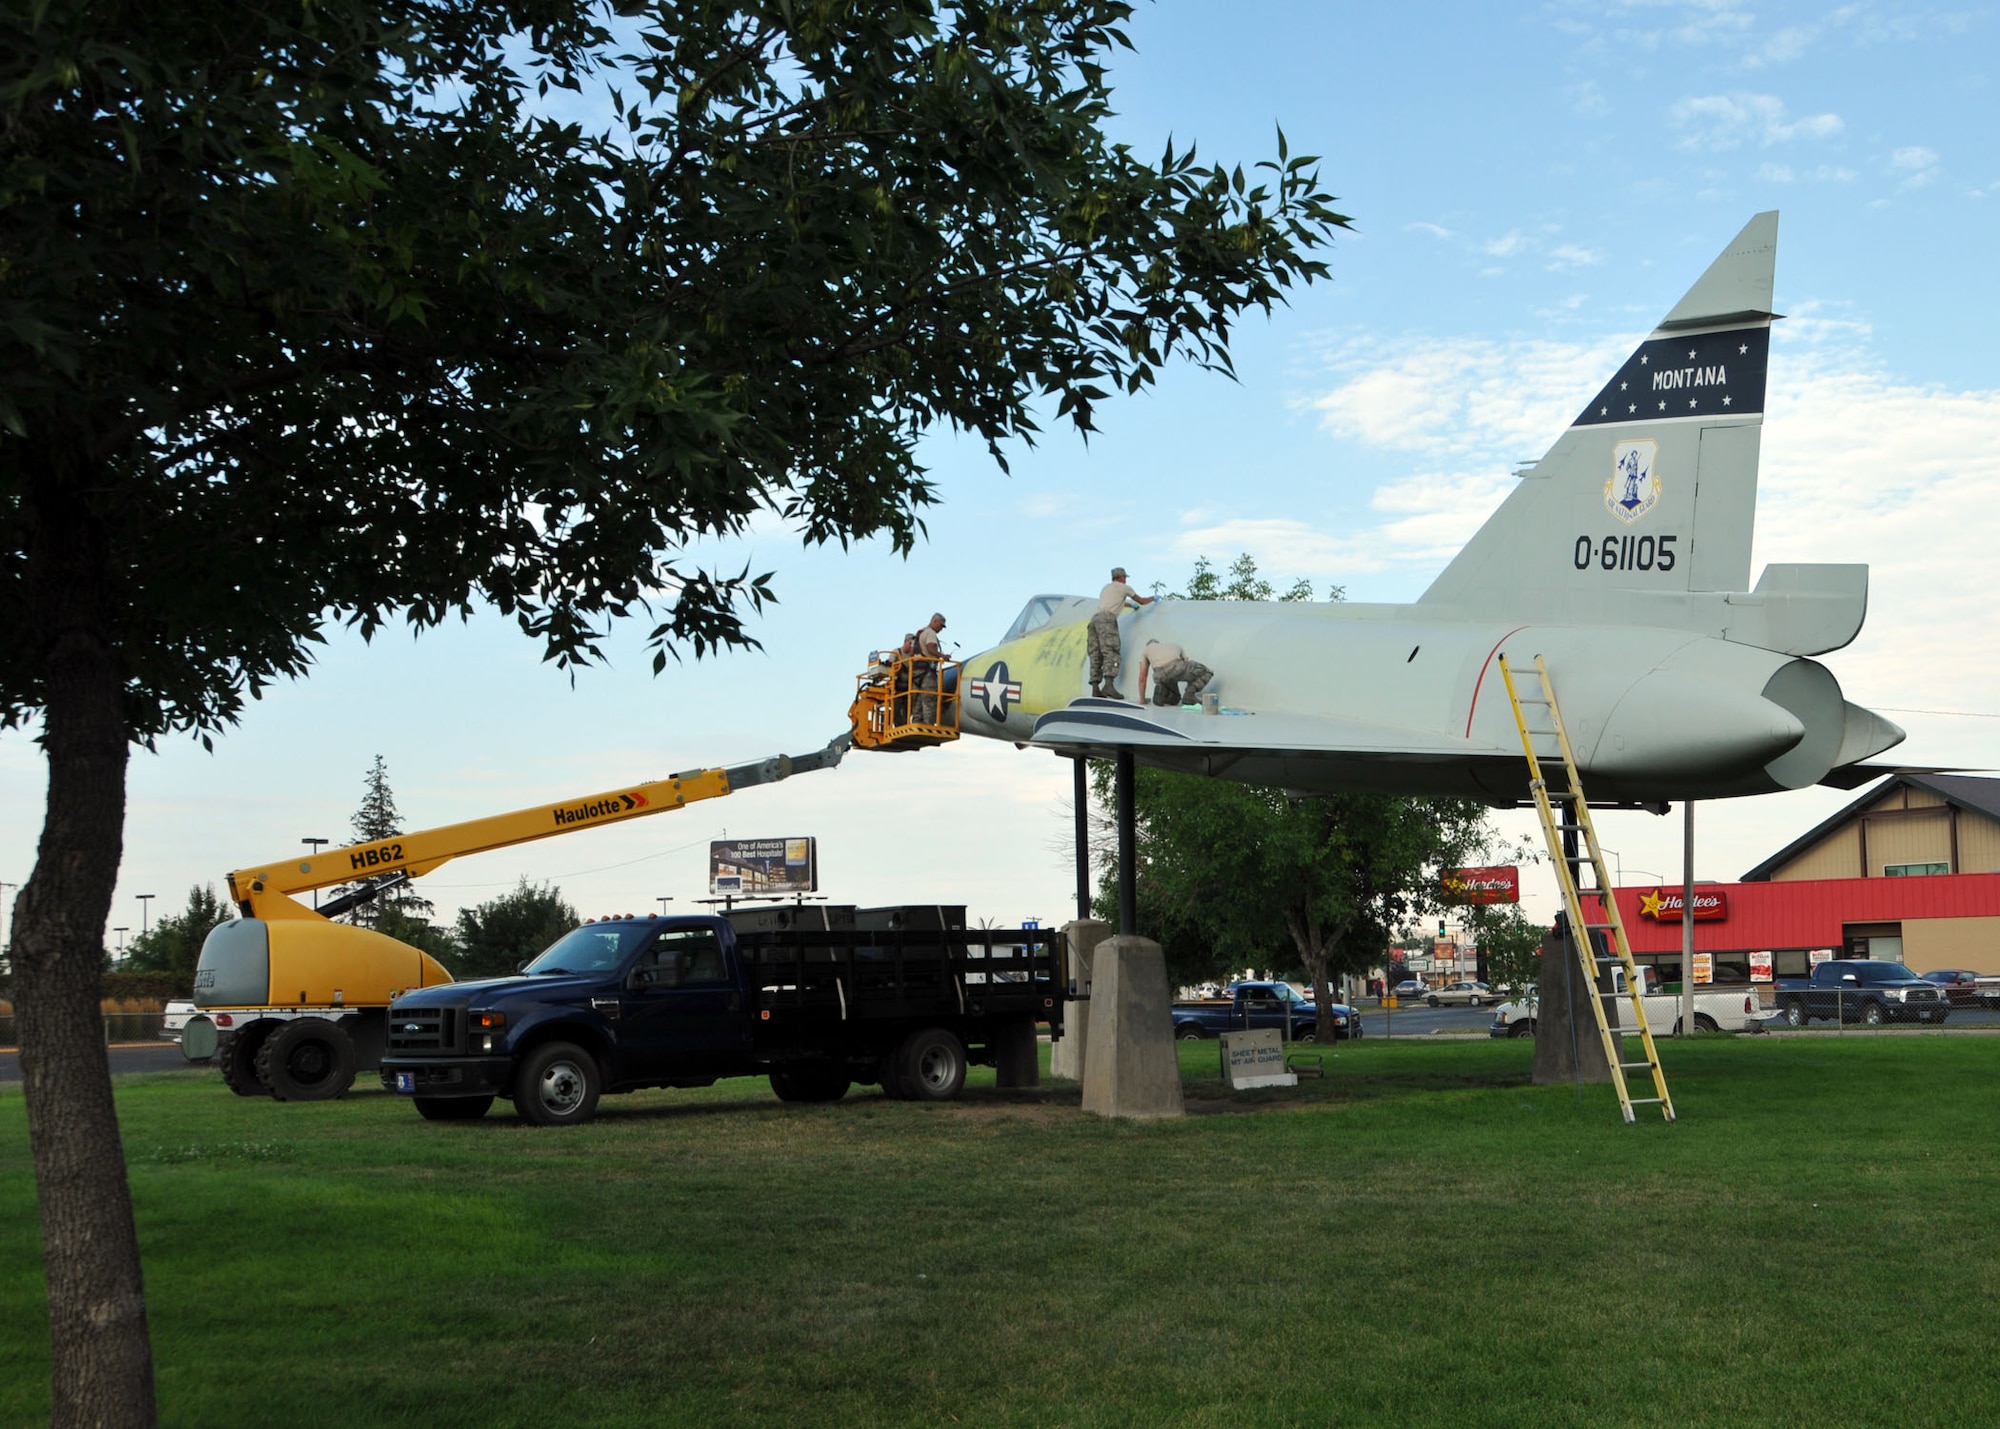 U.S. Airmen of the 120th Fighter Wing, Montana Air National Guard work to restore the exterior of the F-102 Delta Dagger fighter aircraft that serves as a Lions Park static display in Great Falls, Mont. on Sept. 4, 2013. National Guard photo/Senior Master Sgt. Eric Peterson.  